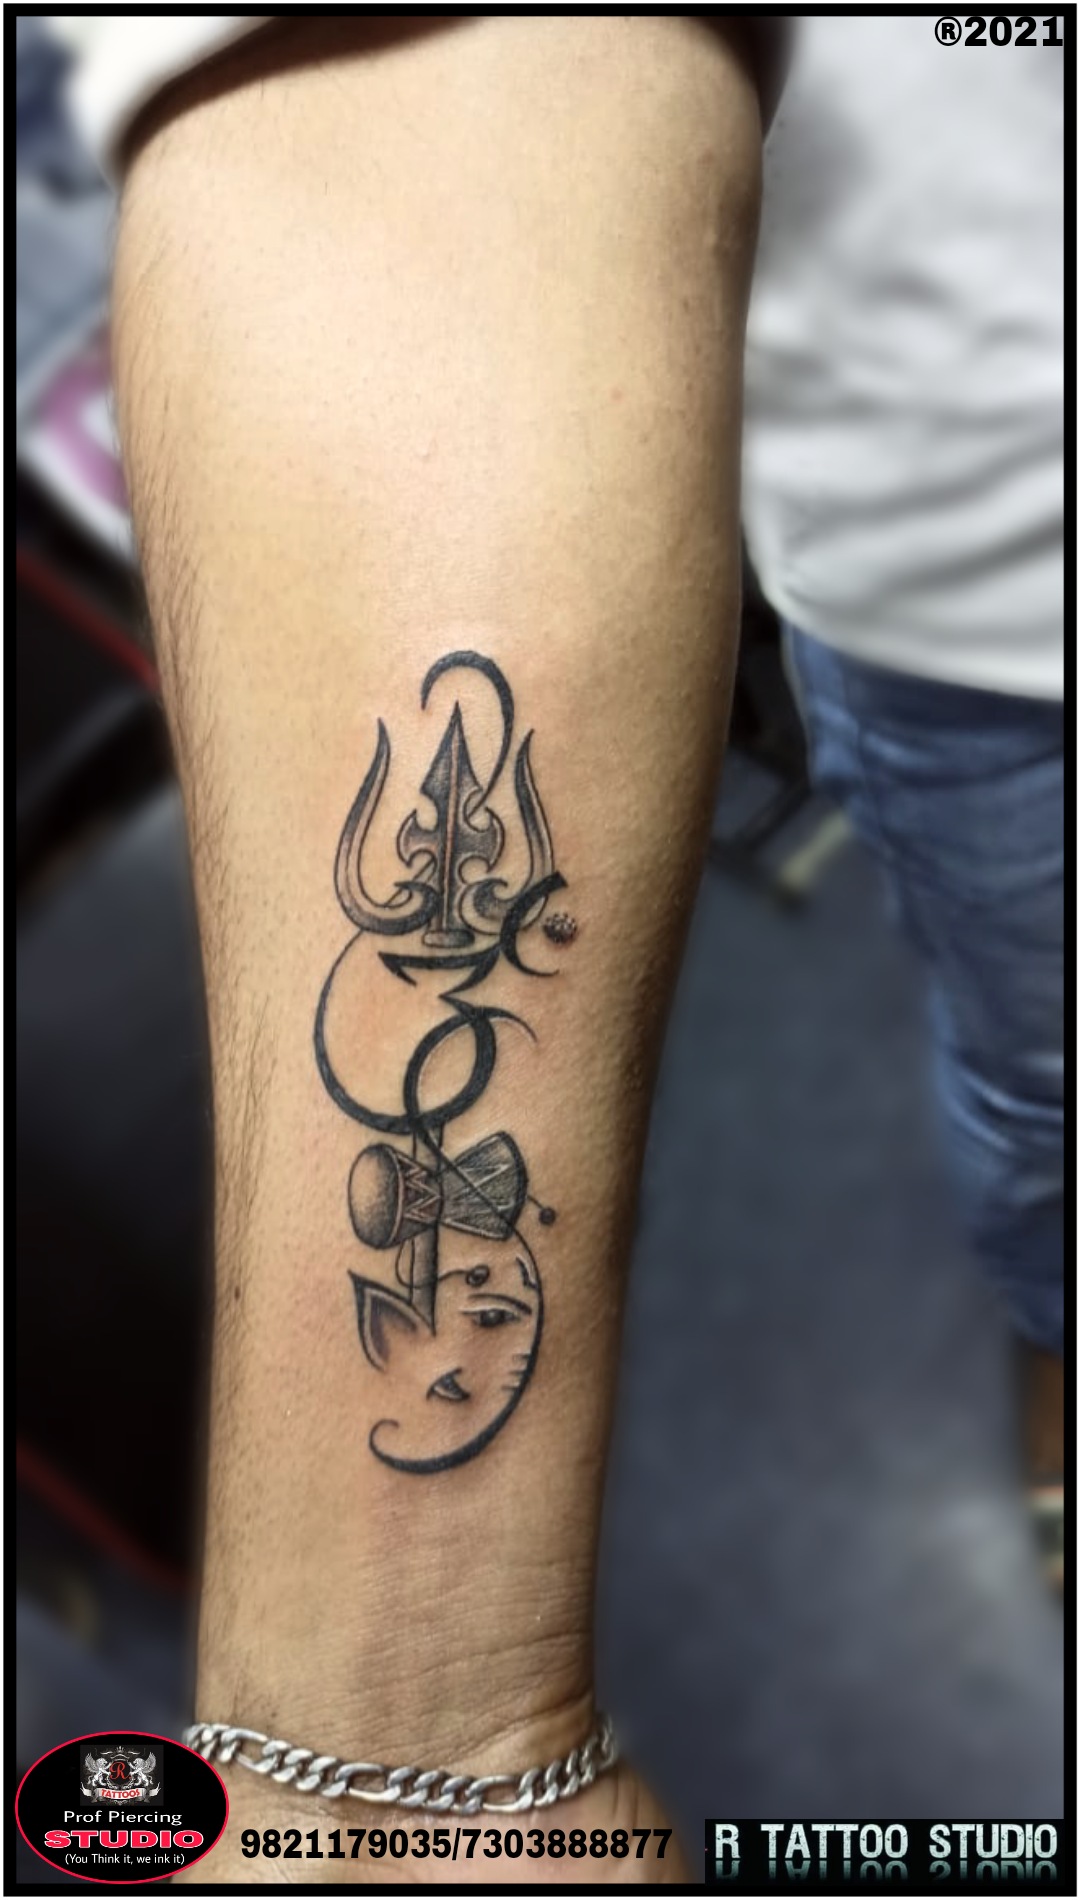 How to Take Care of Your Permanent Tattoo Tattoo Aftercare Tips  Vogue  India  Vogue India